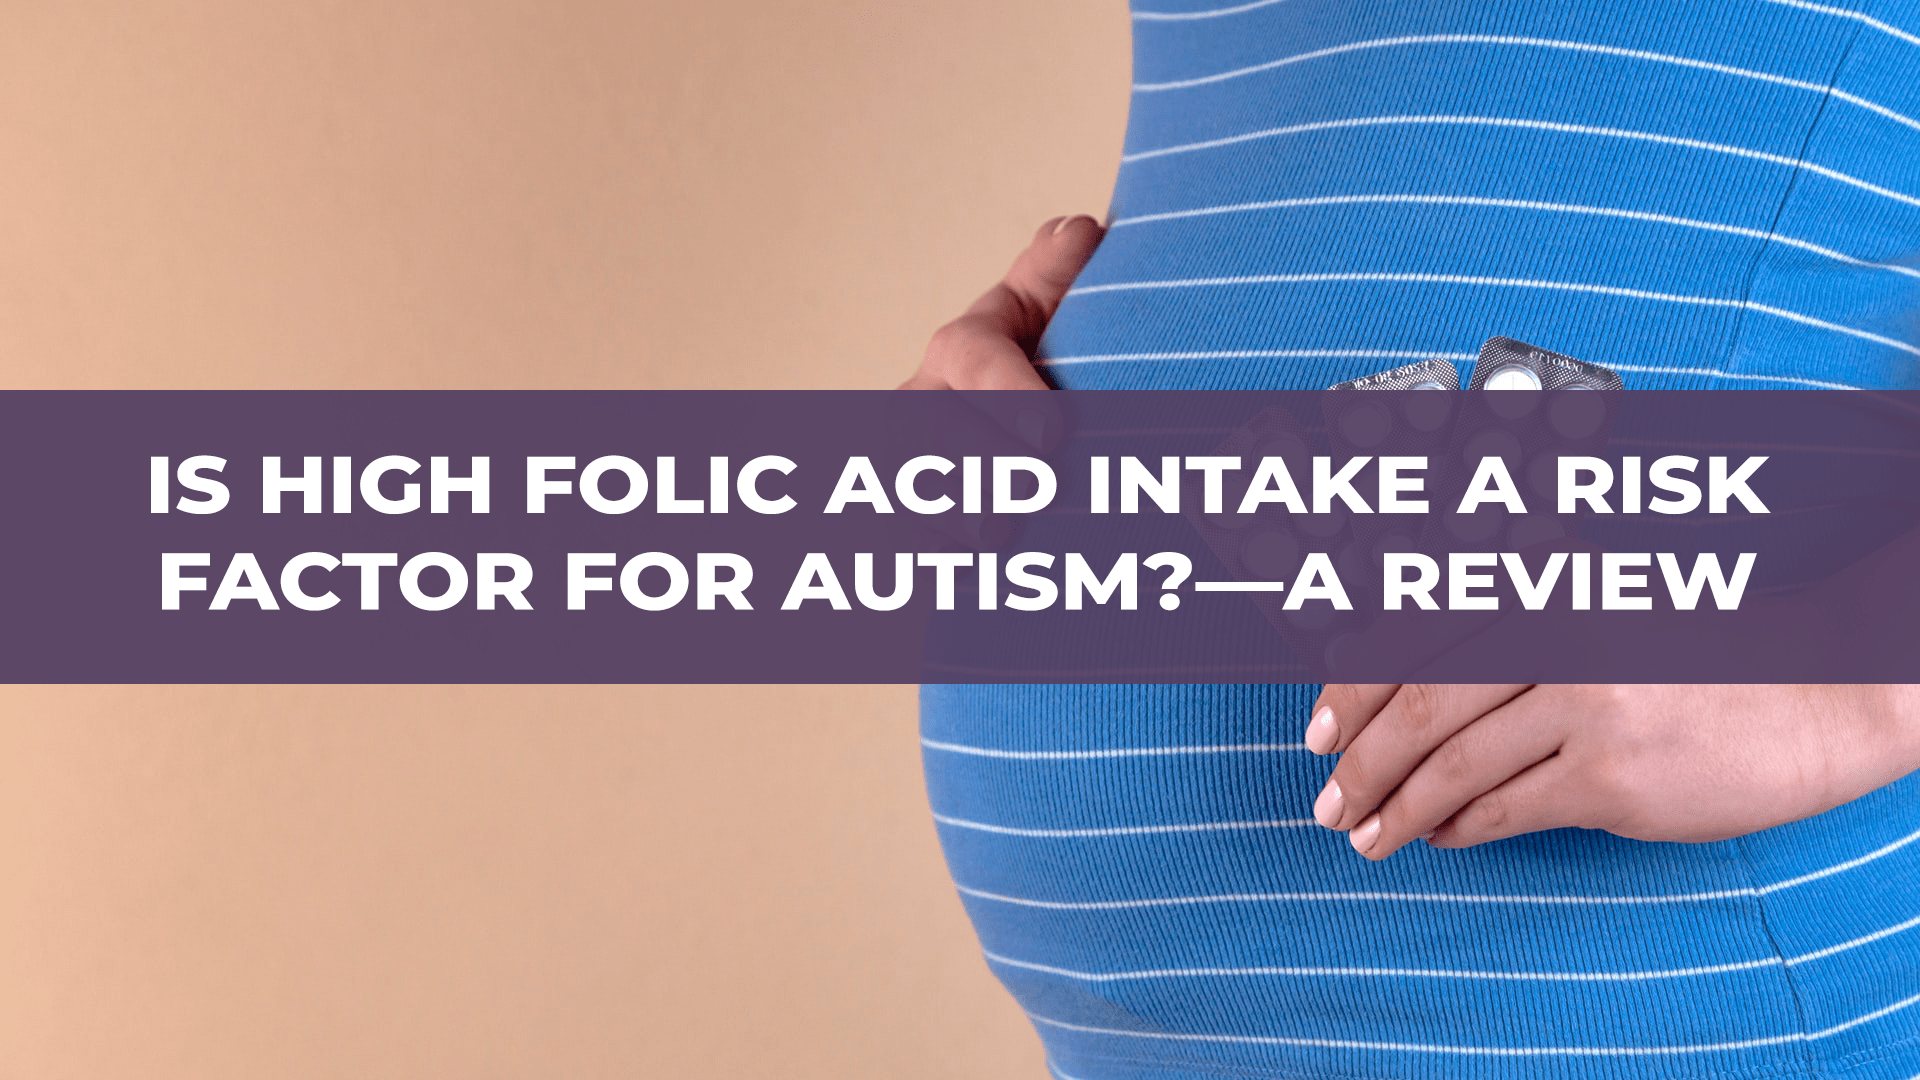 Is High Folic Acid Intake a Risk Factor for Autism